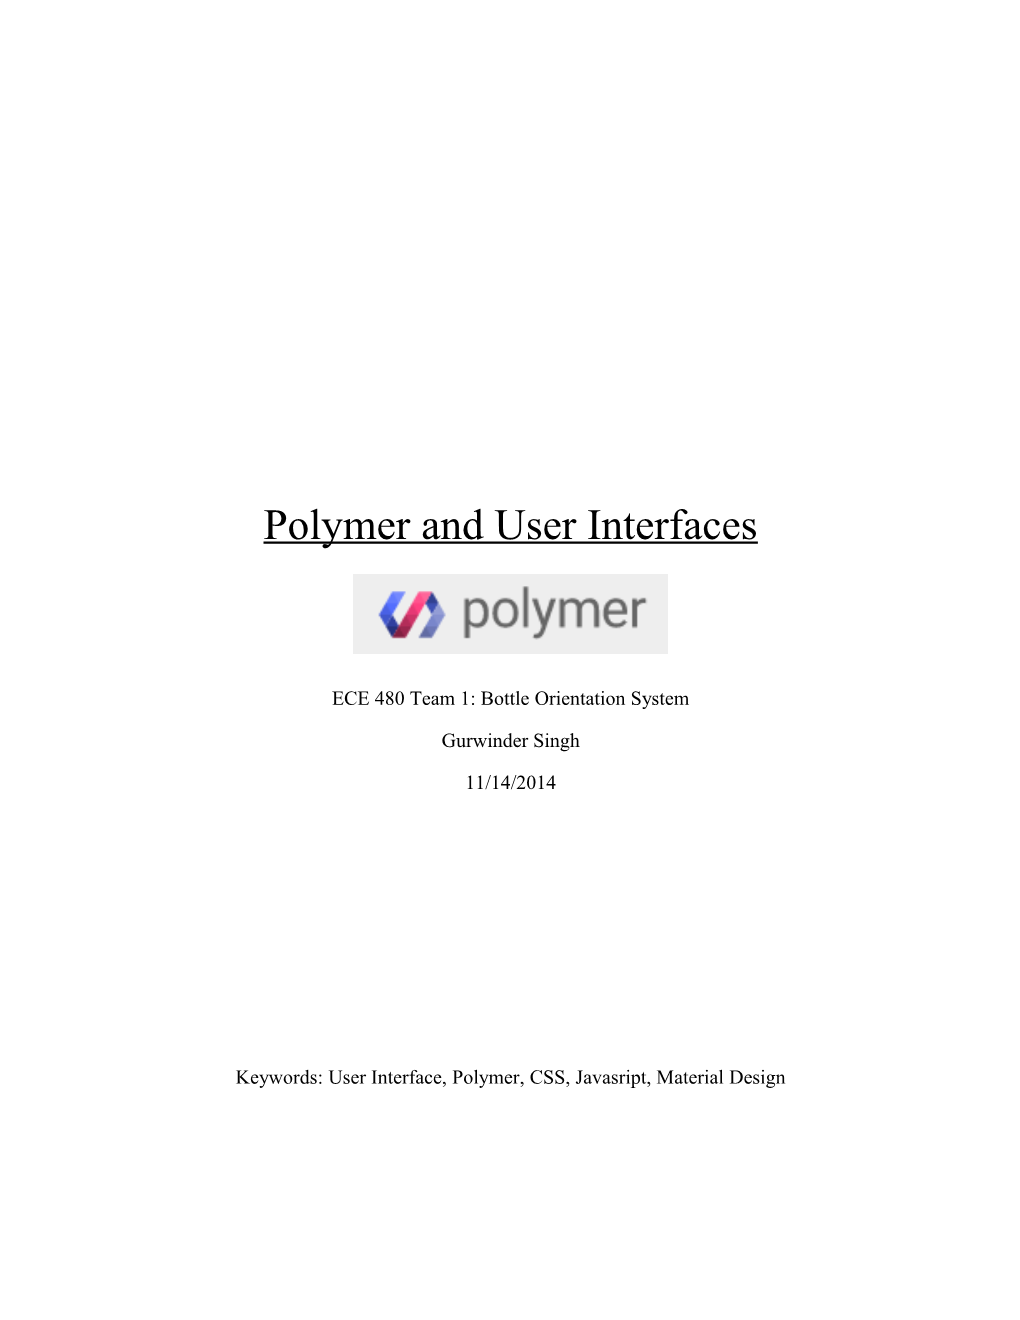 Polymer and User Interfaces